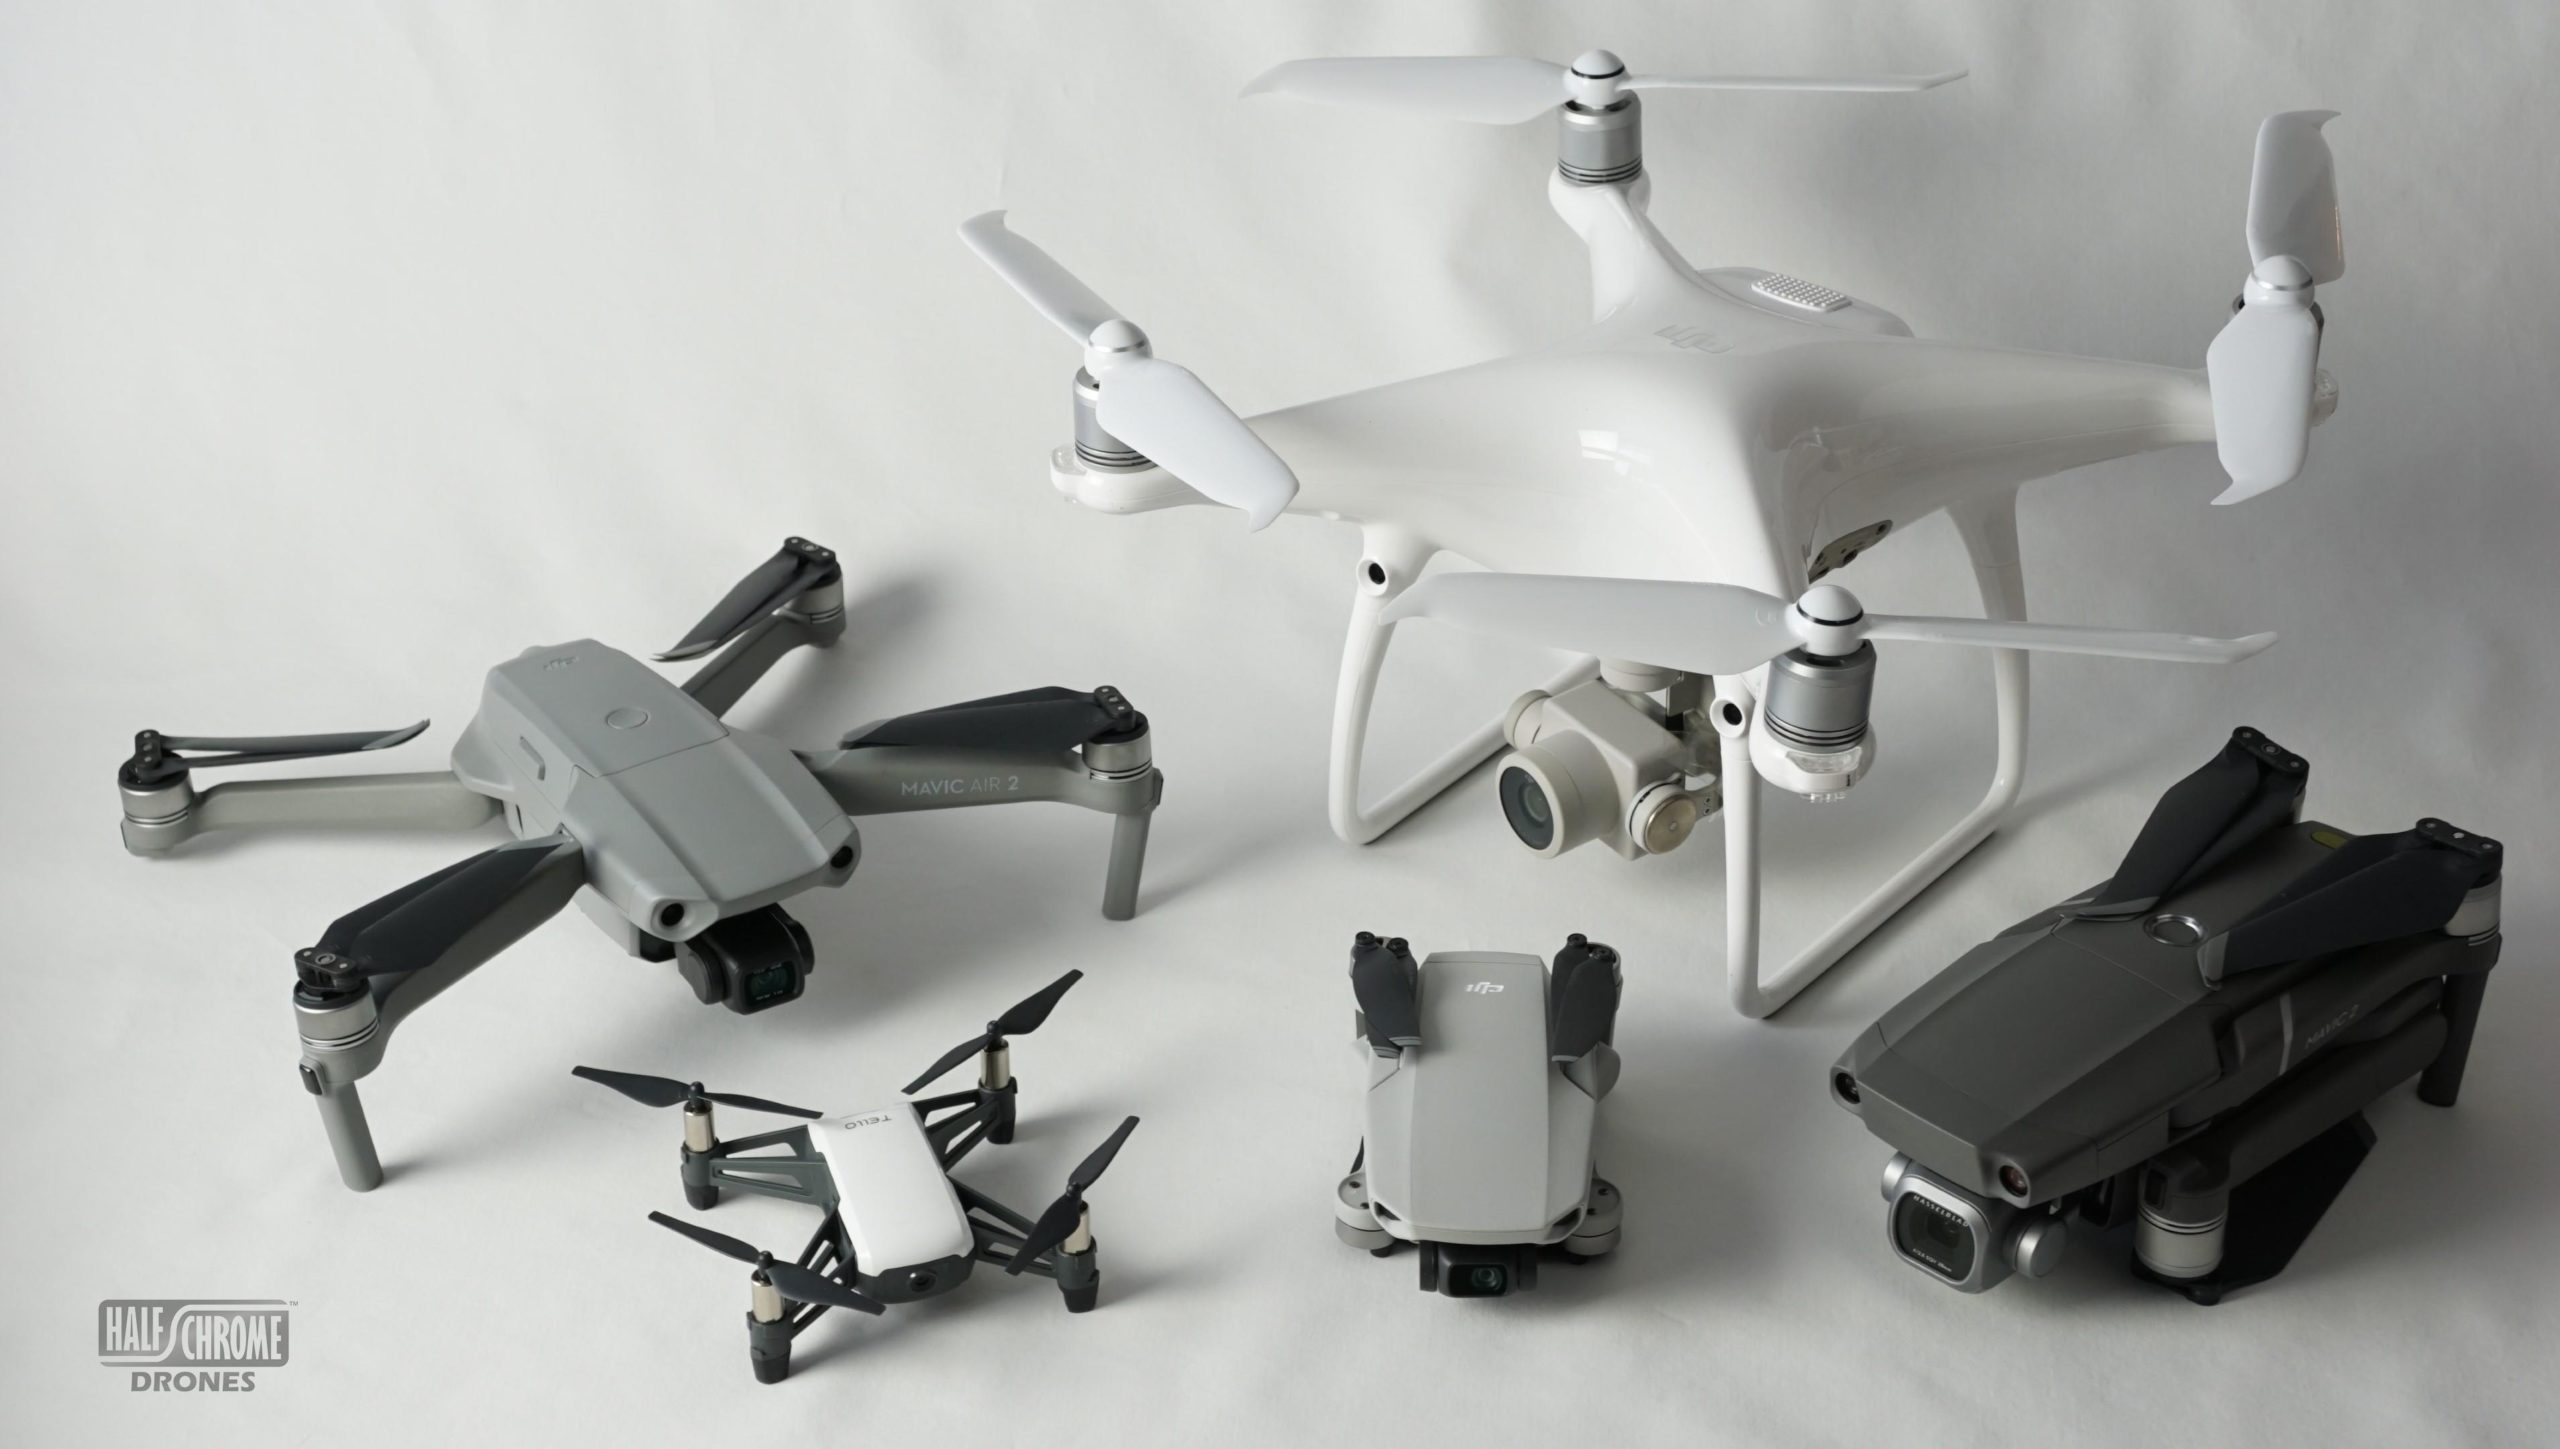 Where is the Best to Buy a Drone? - Half Chrome Drones